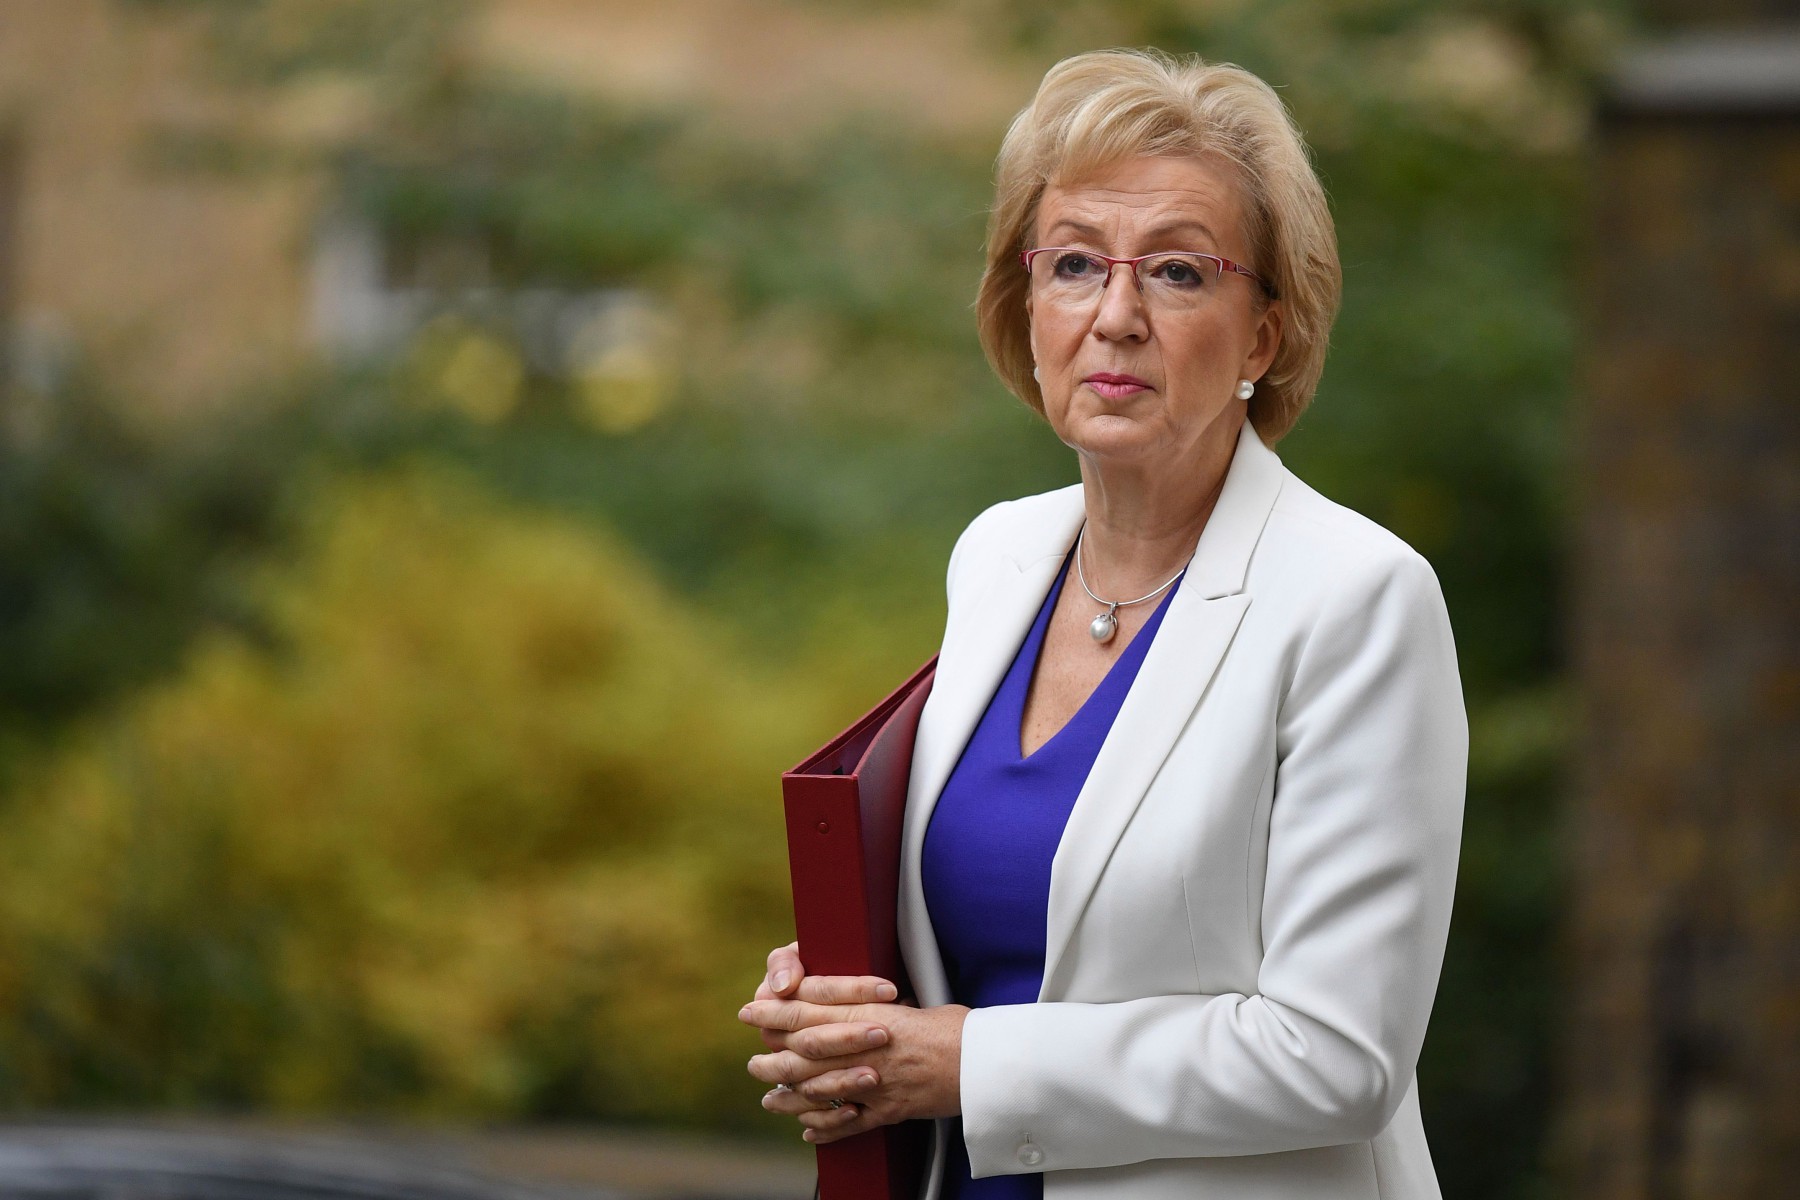 There are only seven women in the 23-strong Cabinet and Britain's Business Secretary and Brexiteer, Andrea Leadsom, may also be looking for a new role